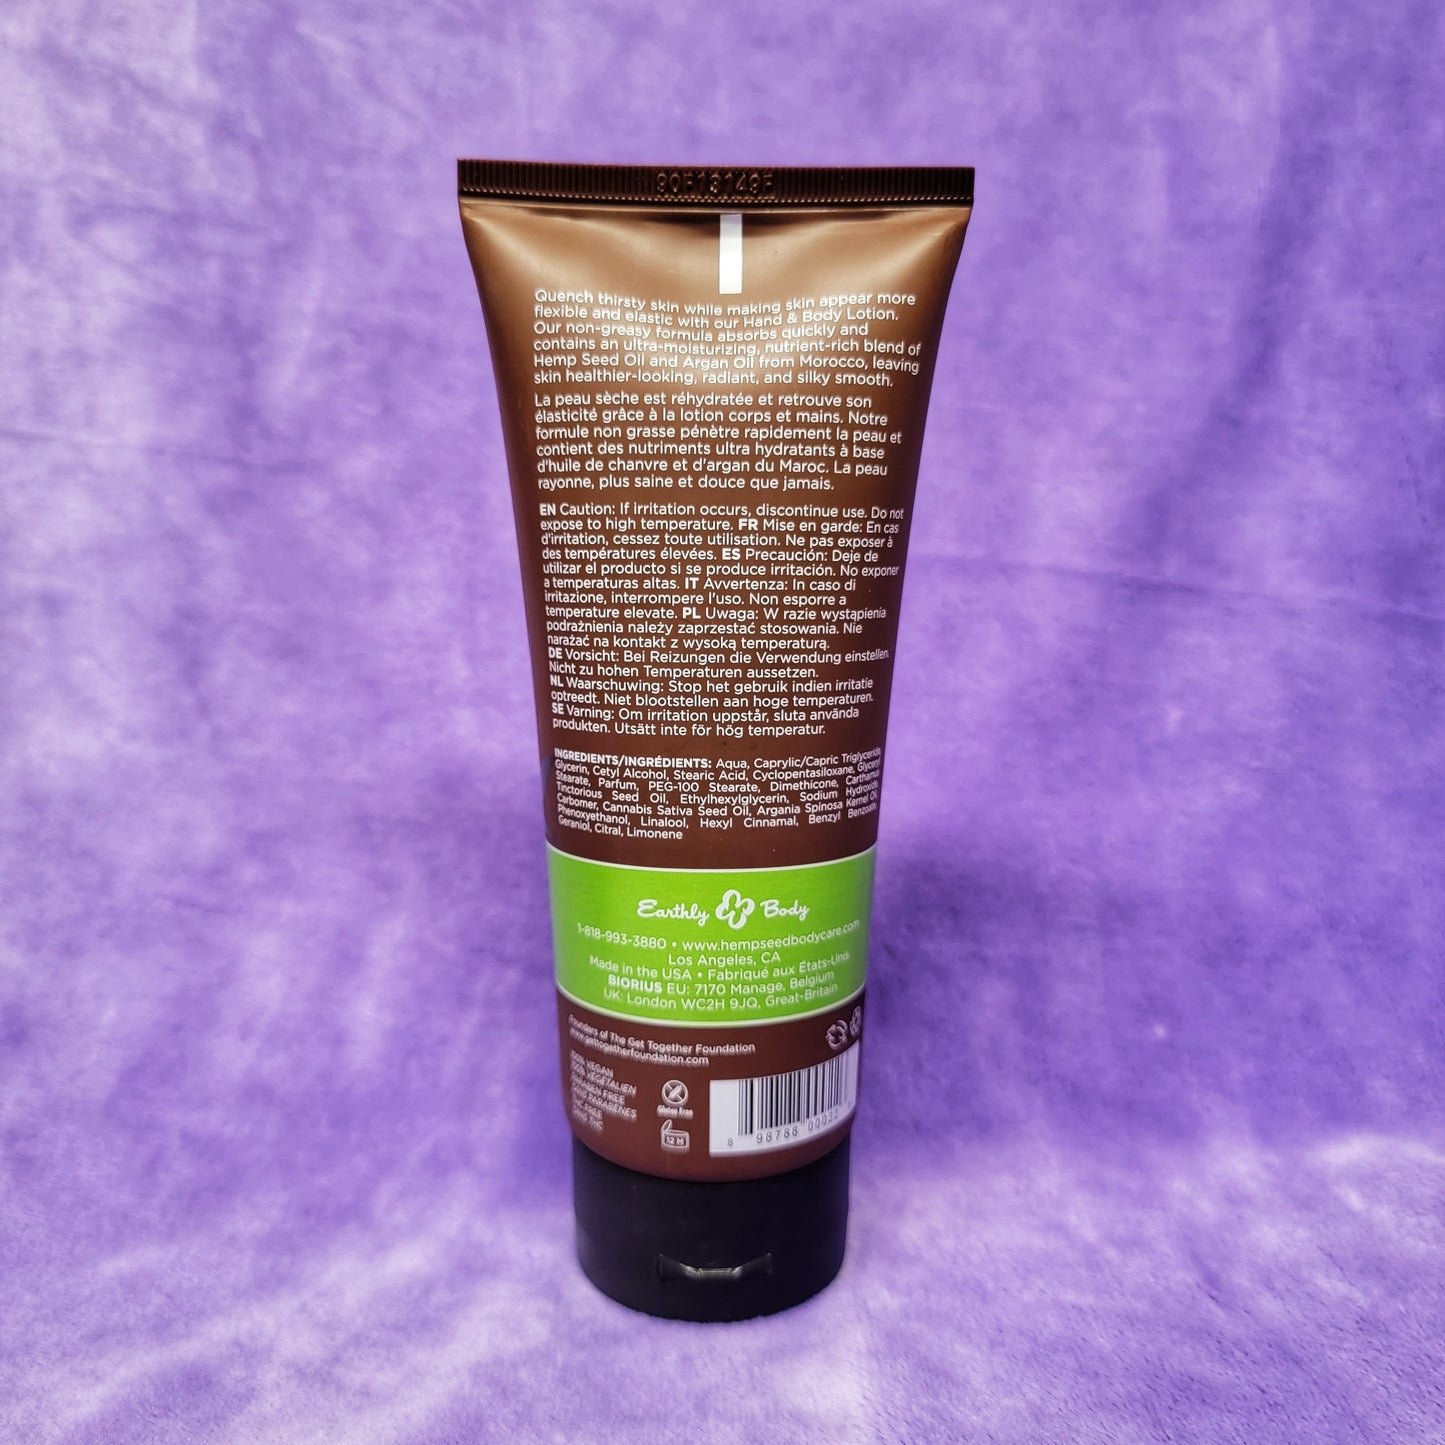 Naked in the Woods - Hemp Seed Hand & Body Lotion by Earthly Body